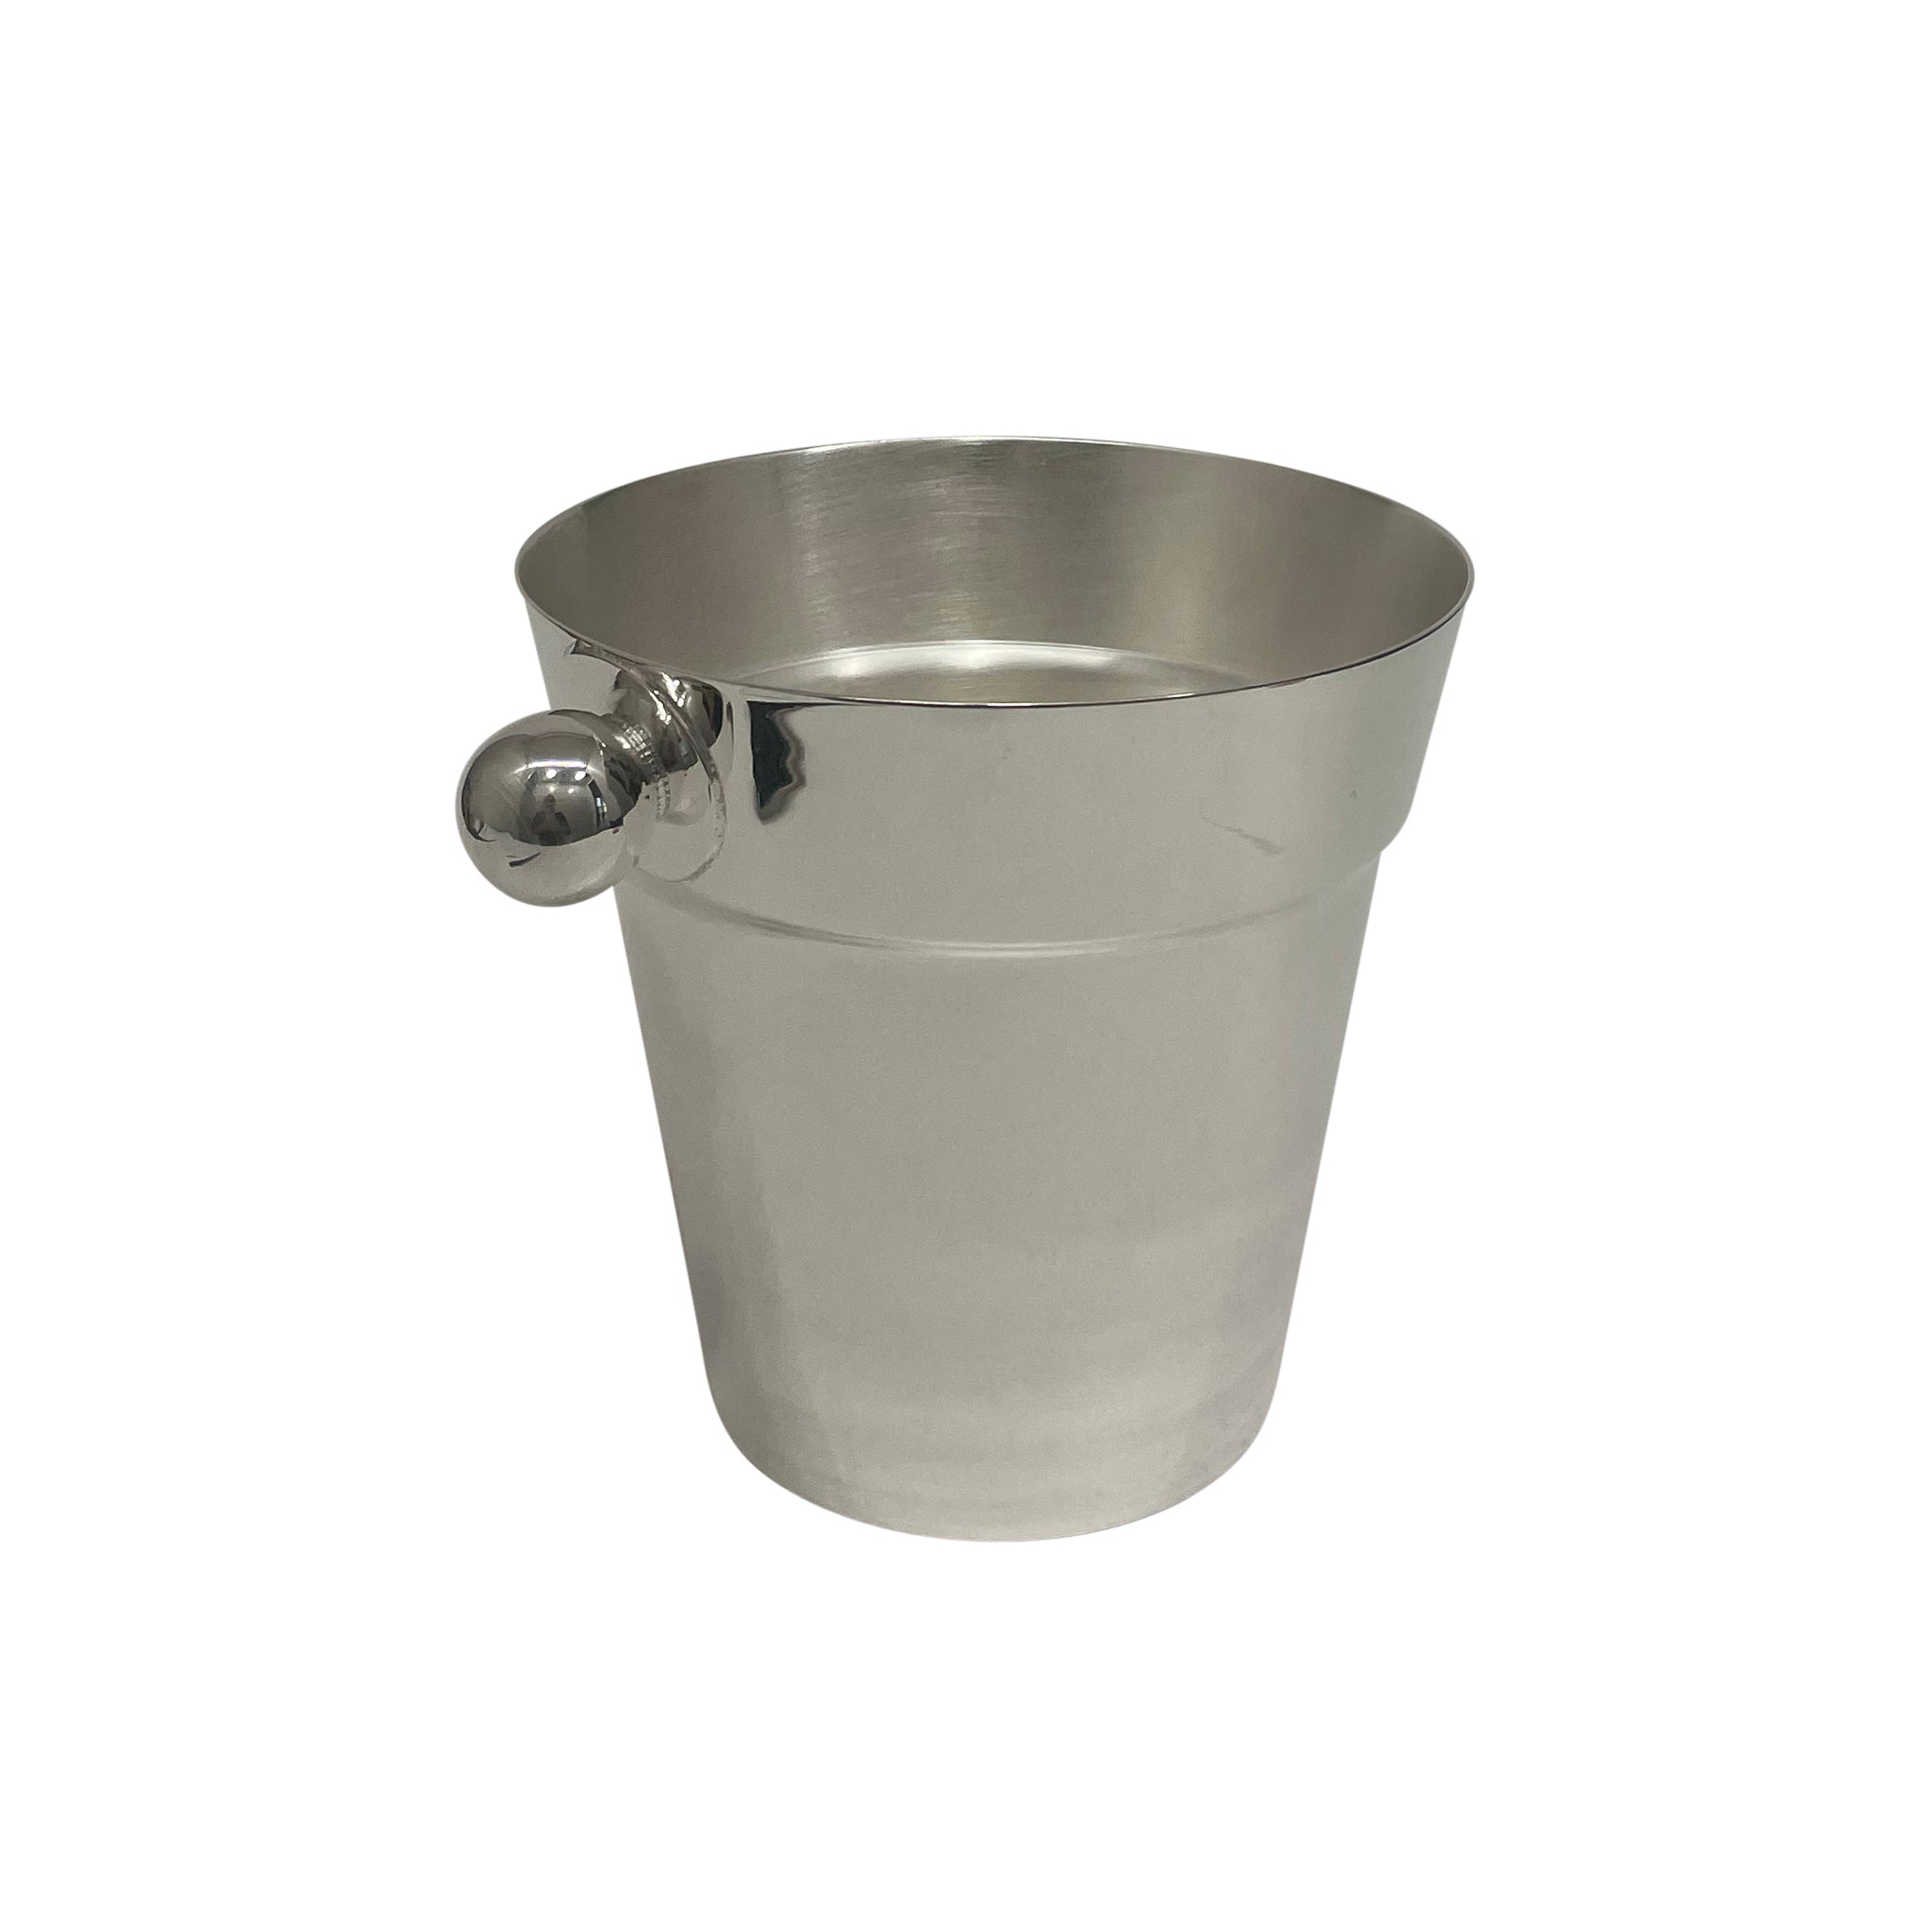 Vintage Cocktail Ice Bucket with Flower Pot Shape and Ball Handles